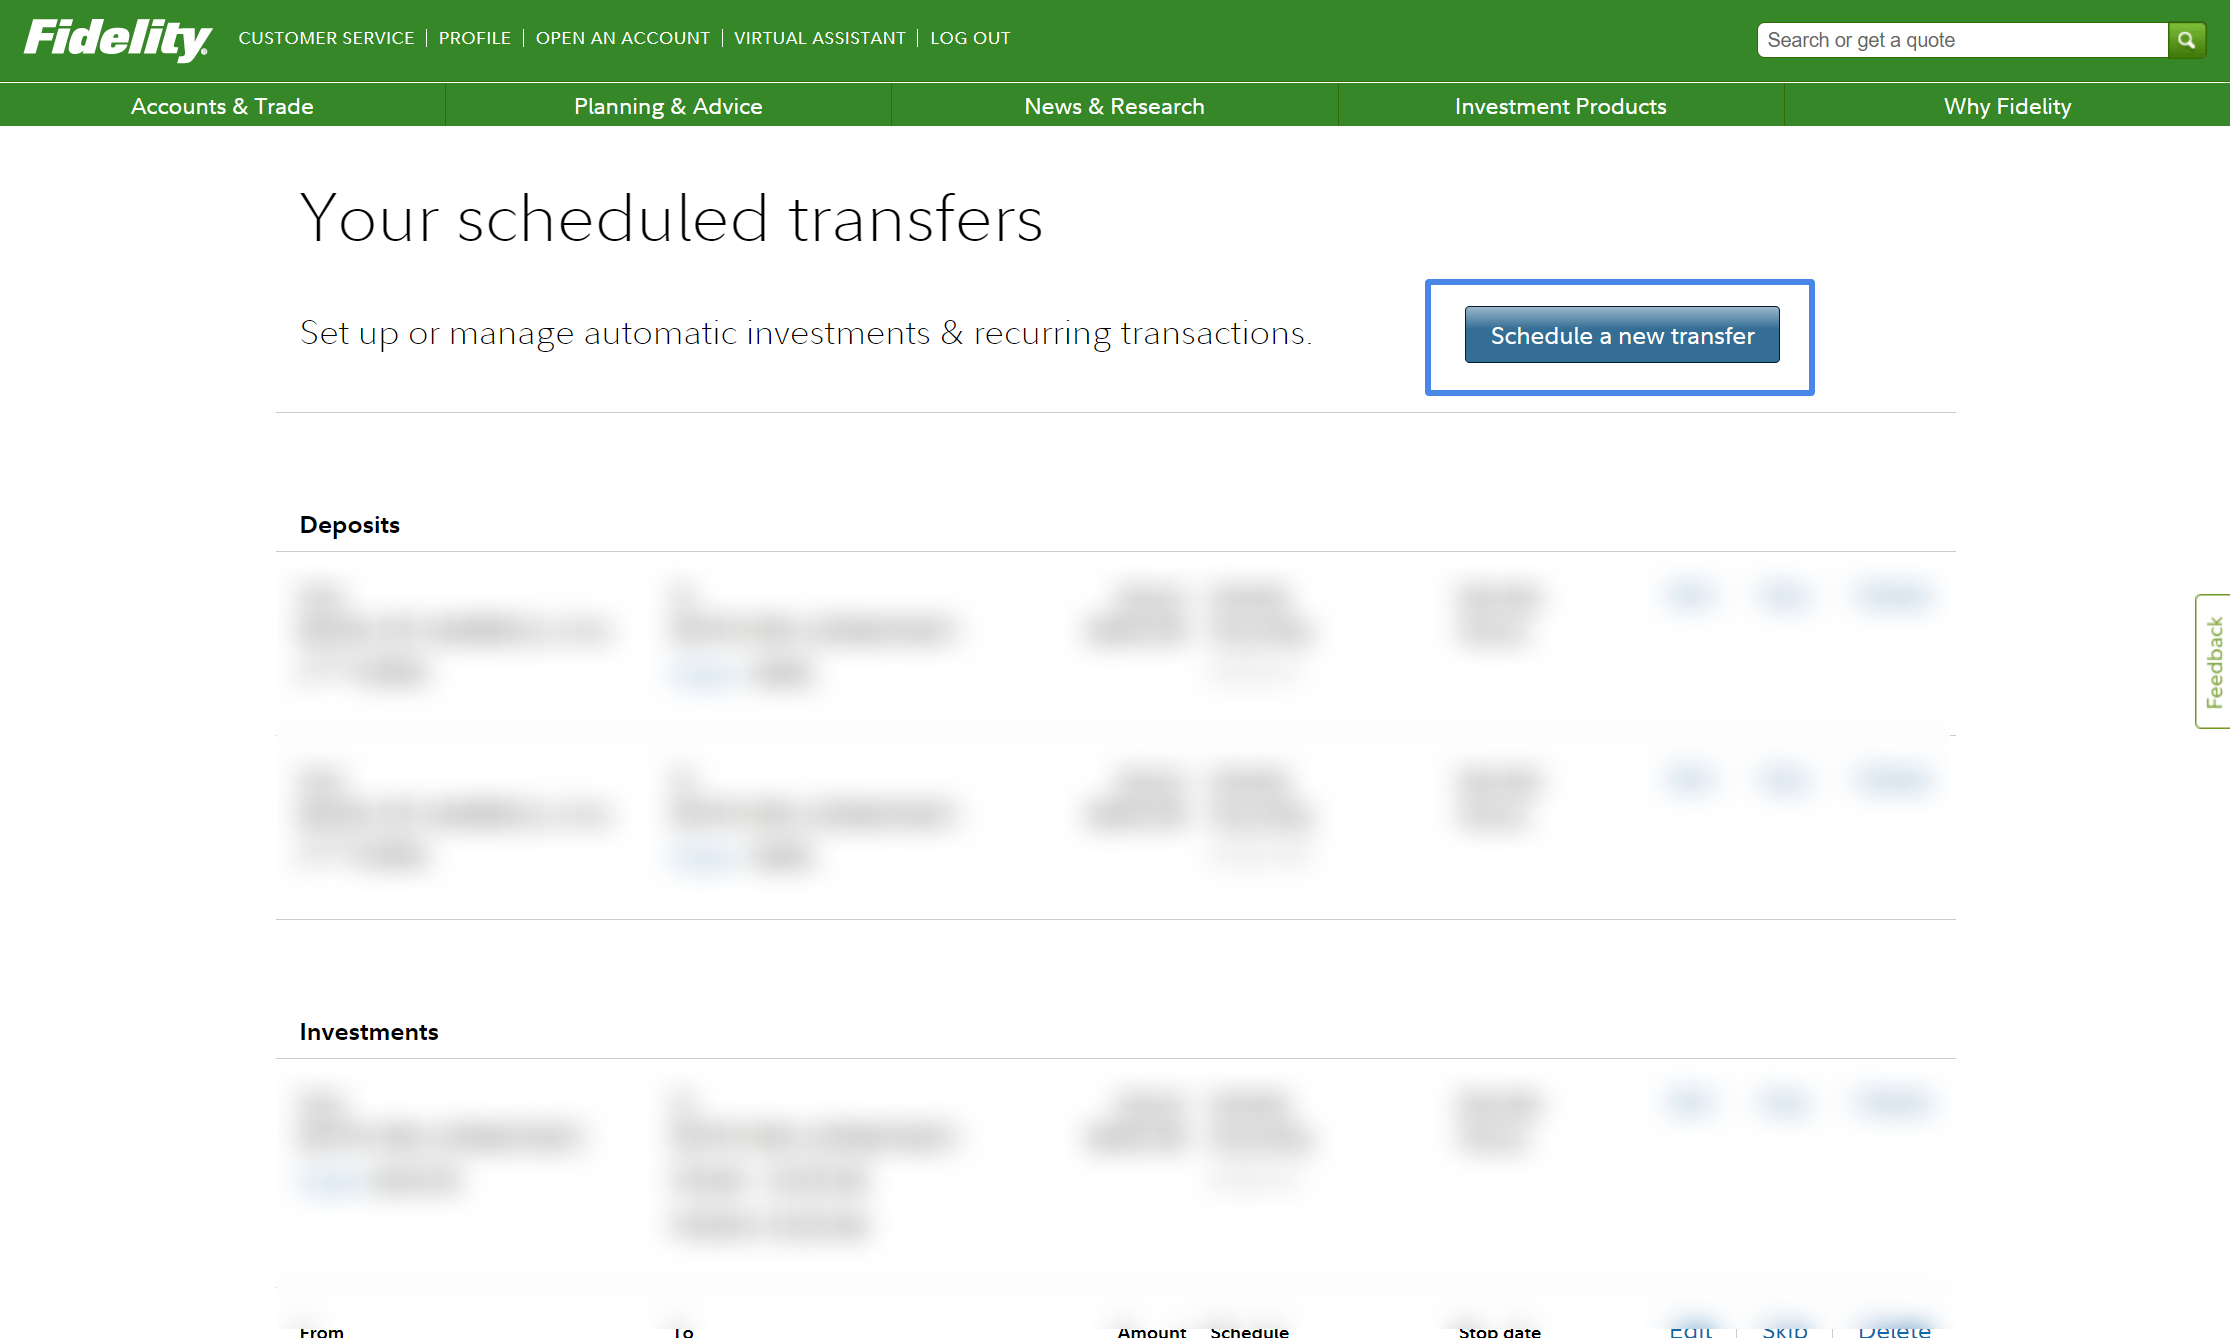 Fidelity Roth IRA: Schedule a new transfer